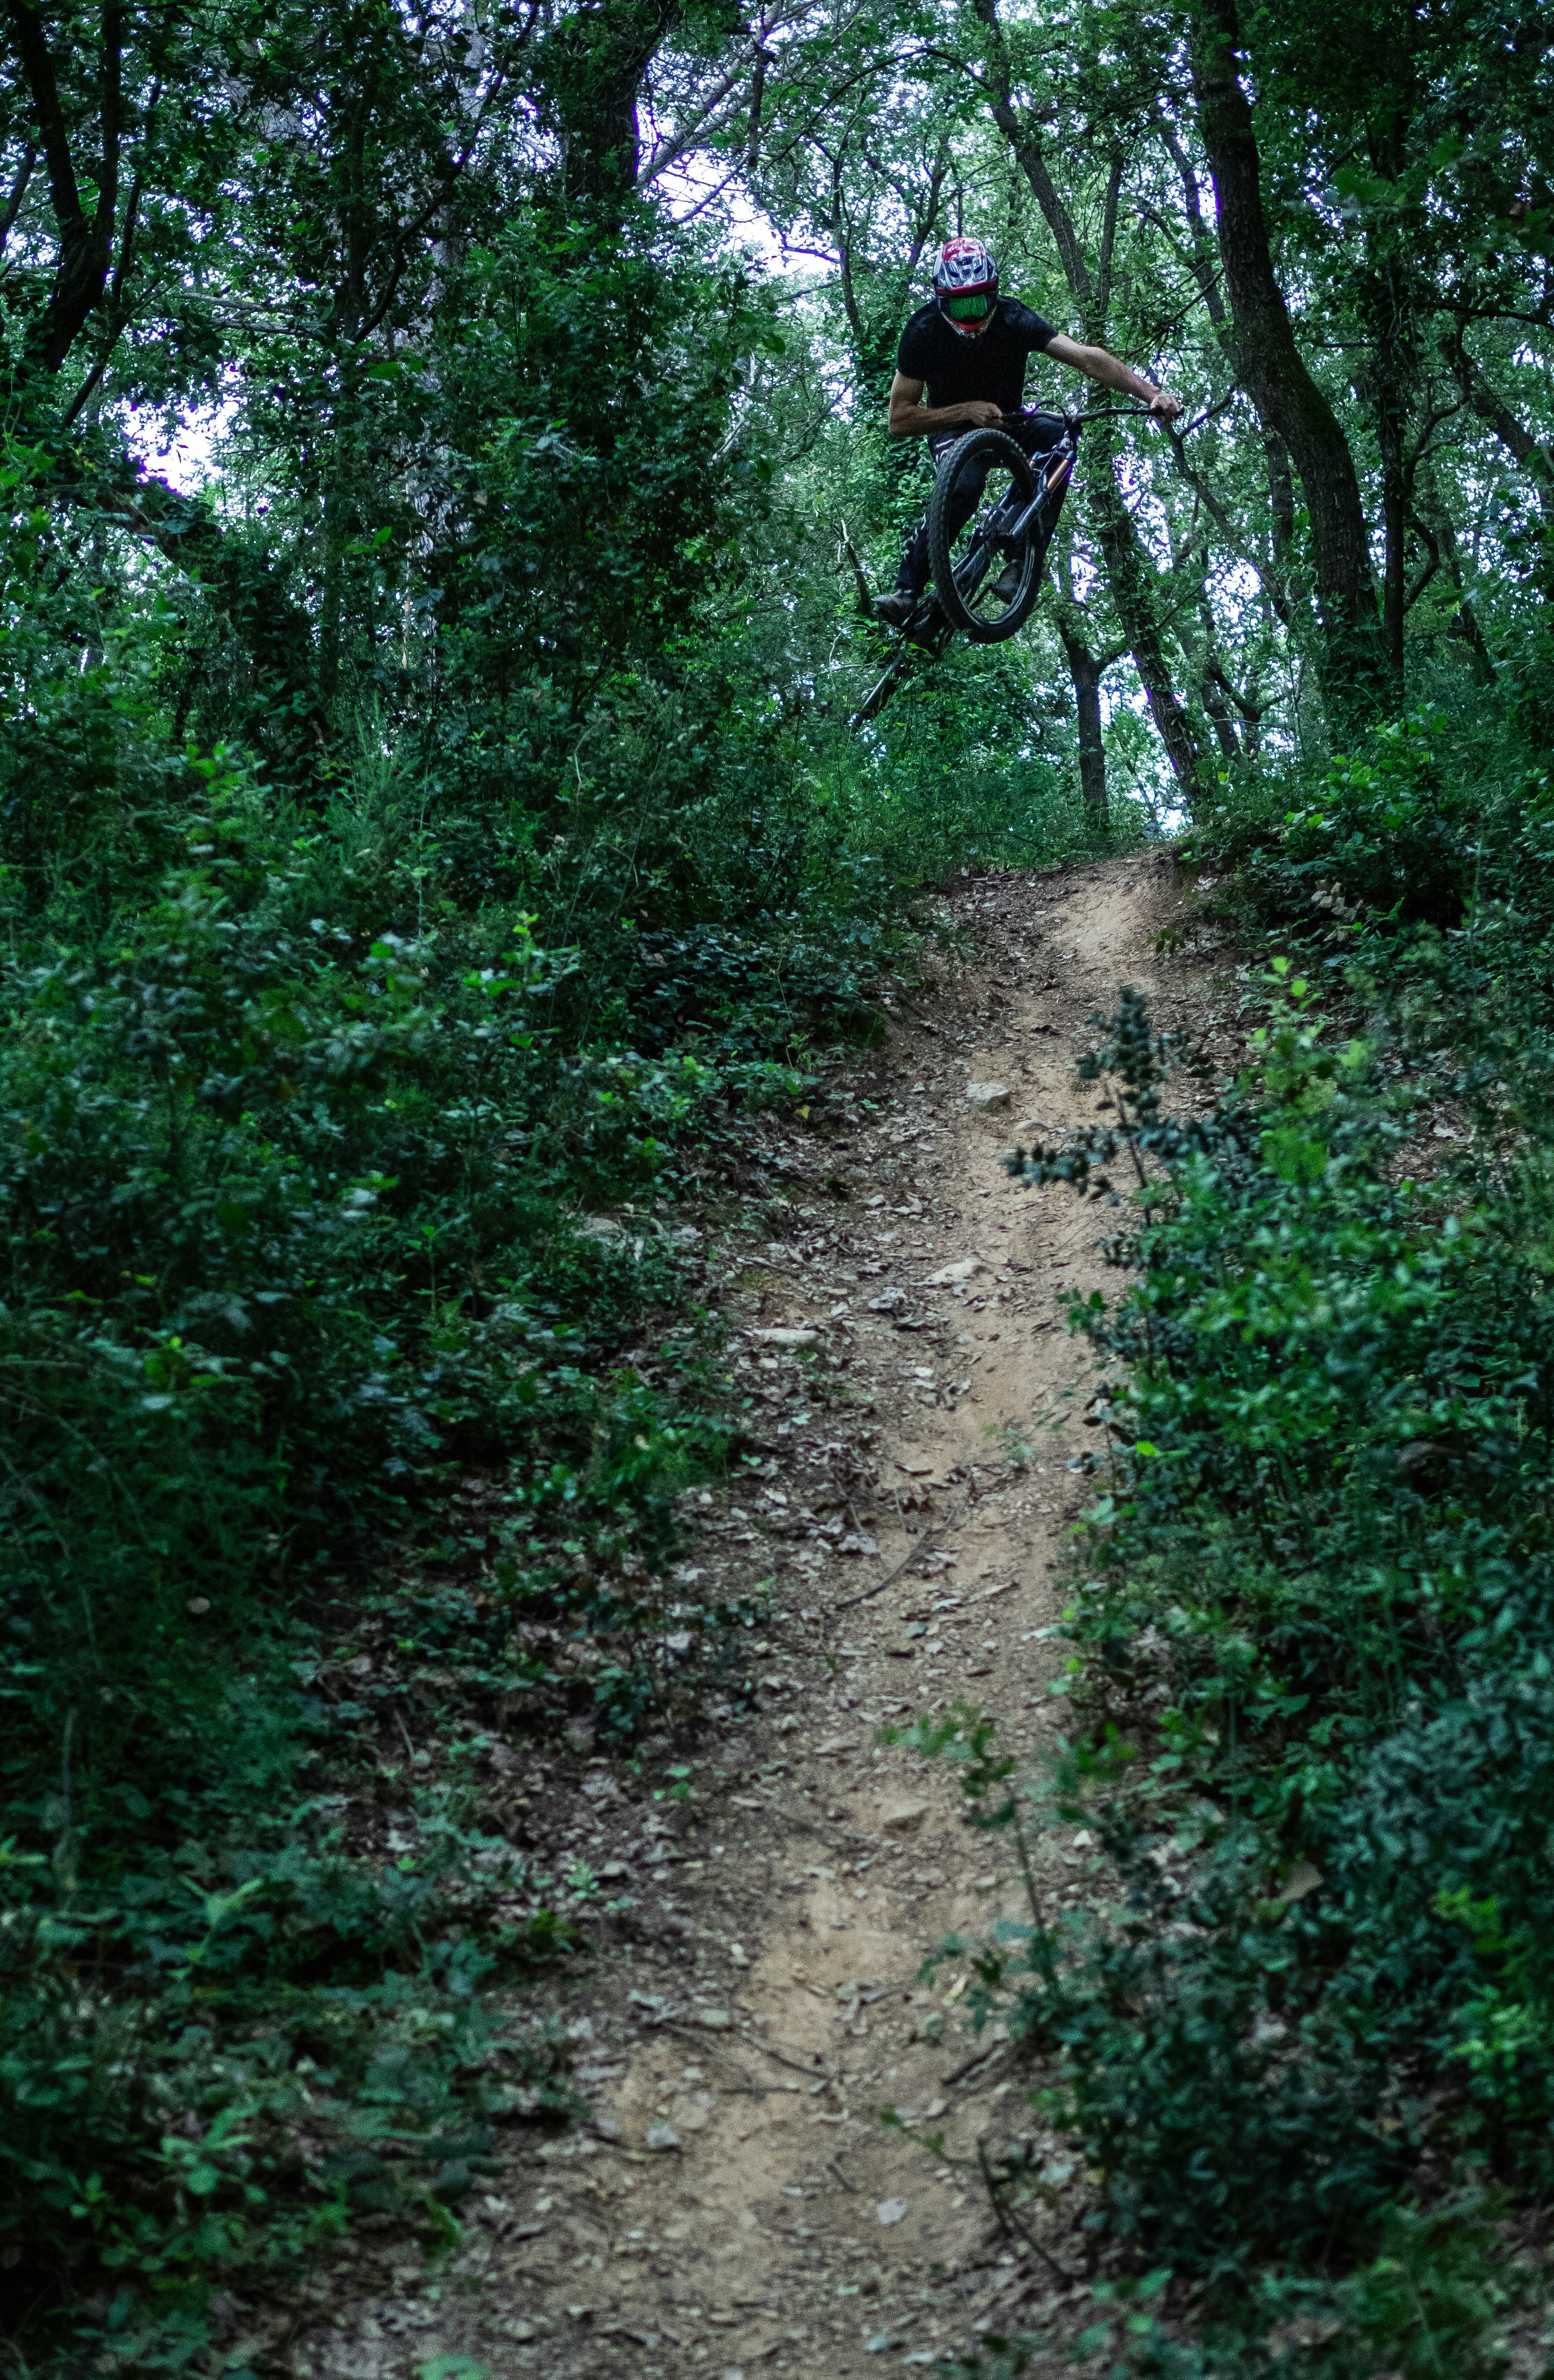 Freeride Downhill Bike Session. My friend making a big jump inside a forest, crazy ;).